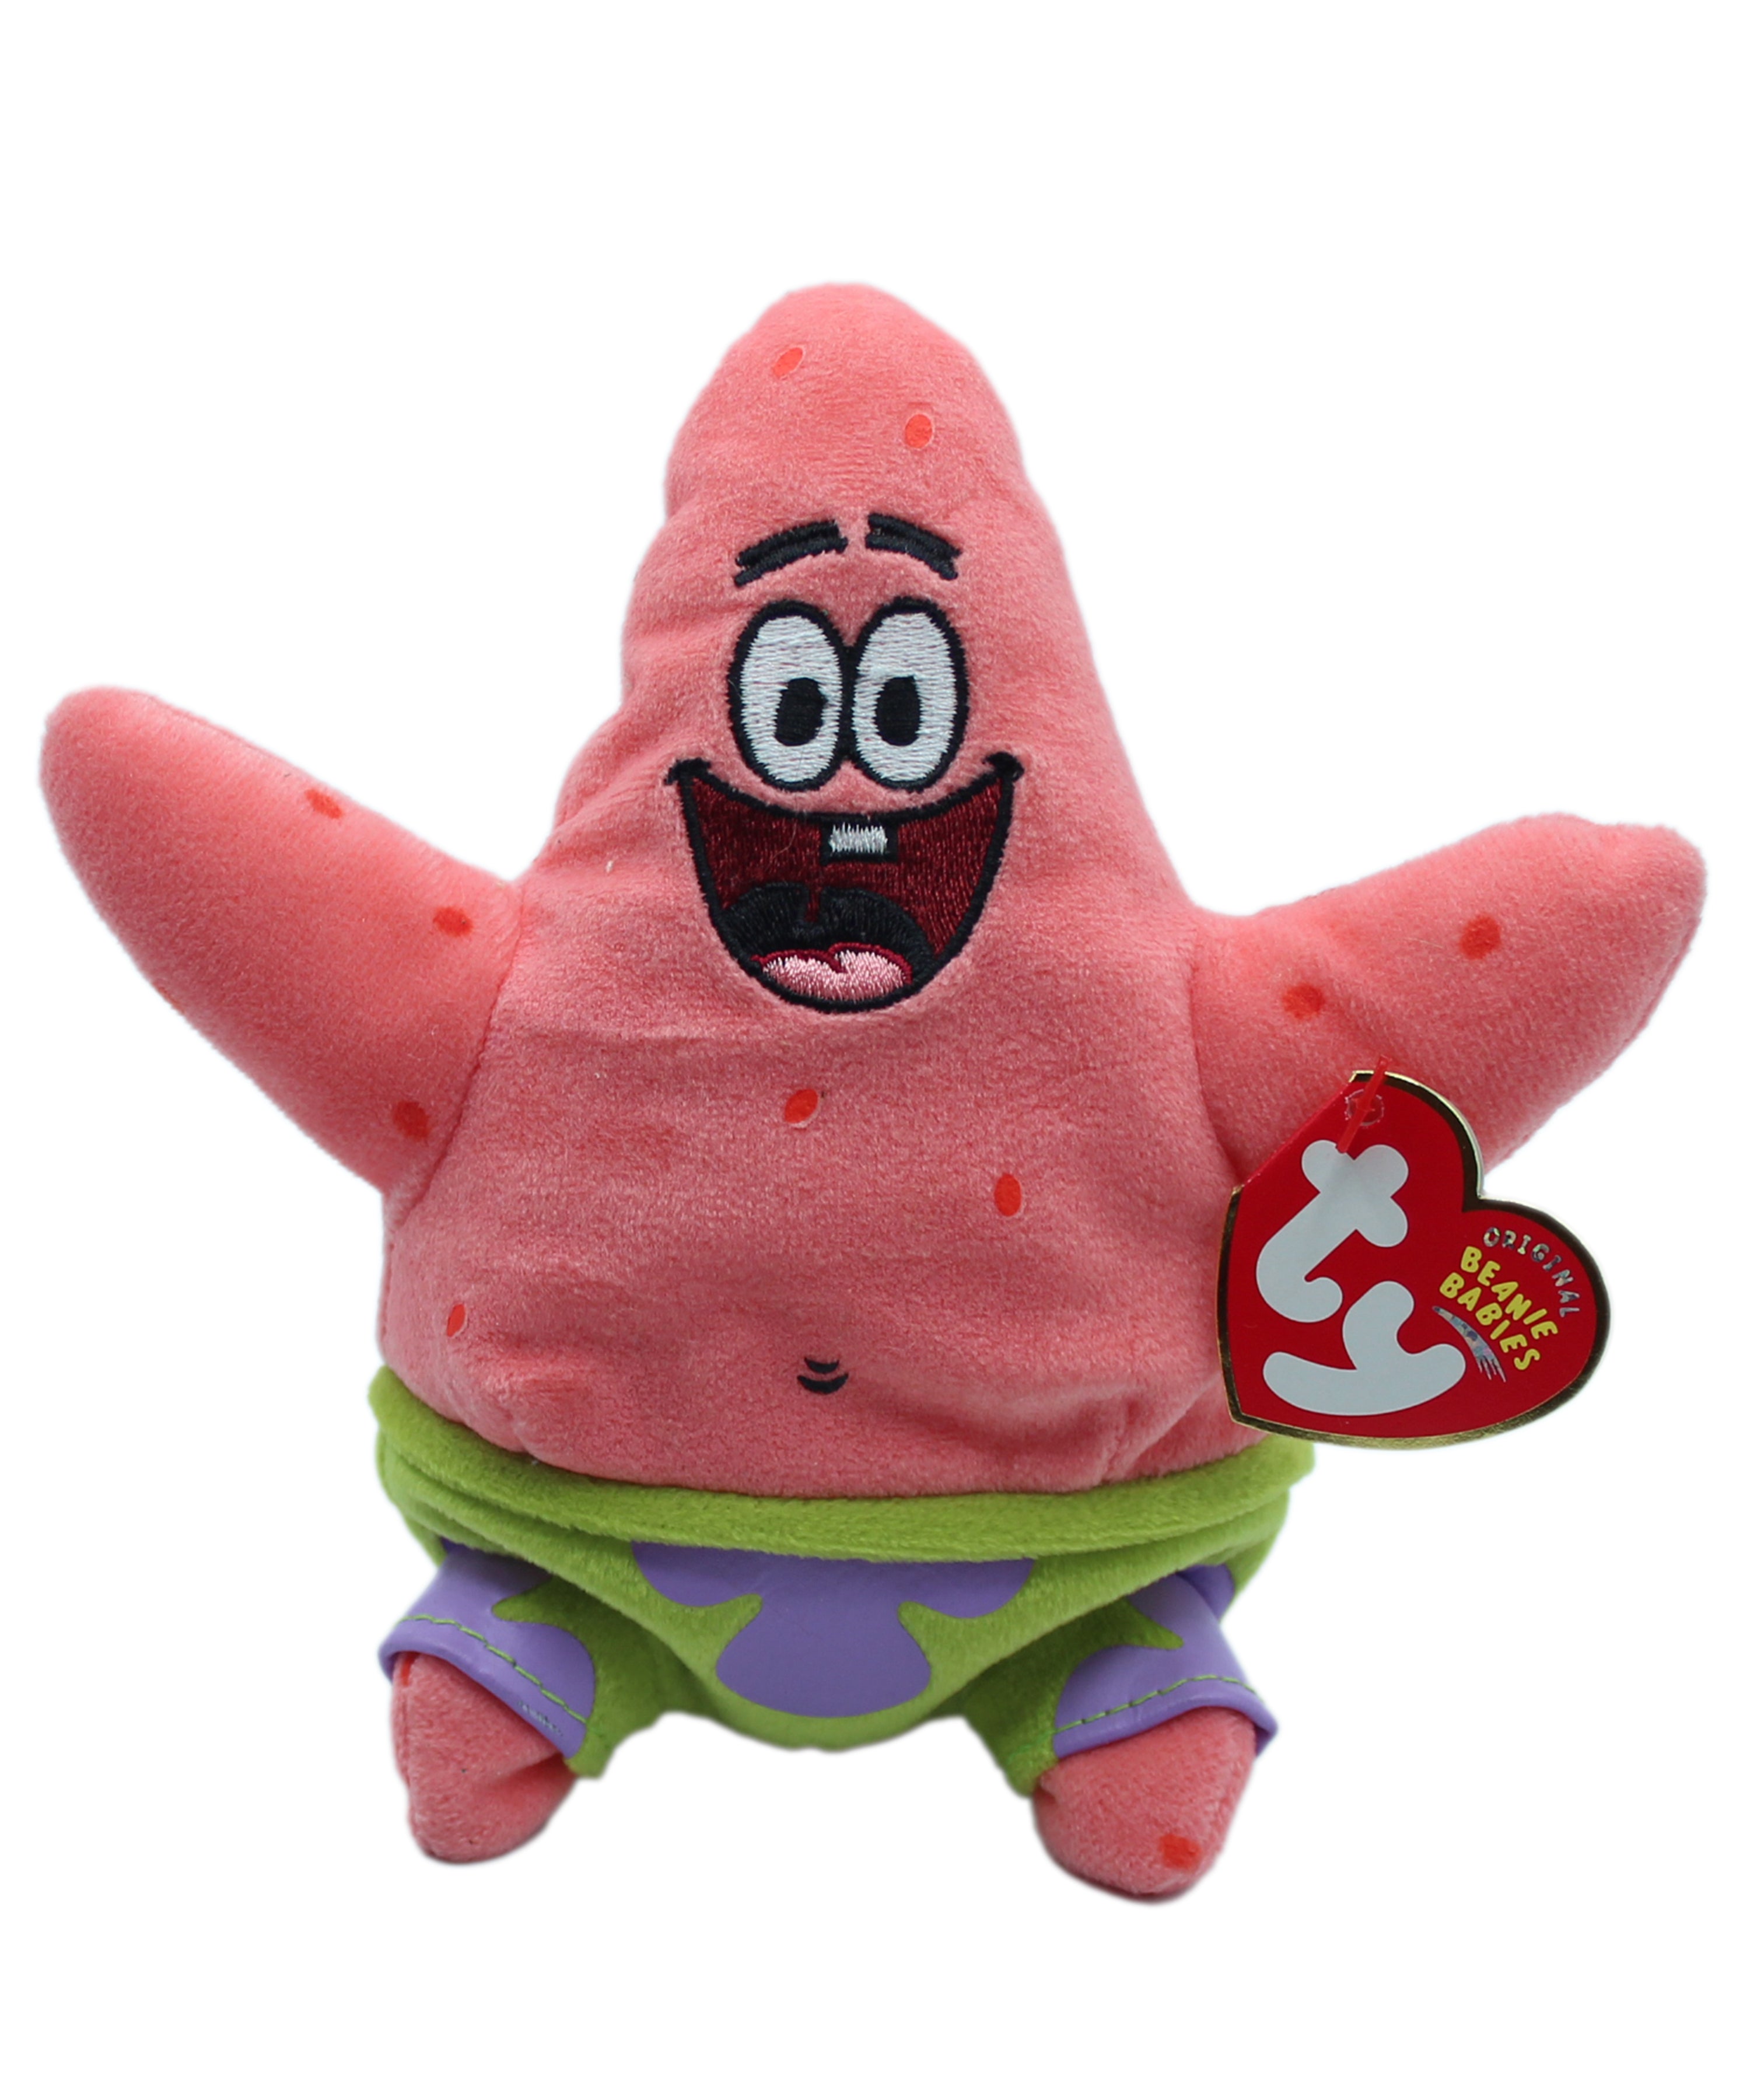 patrick star and spongebob as a baby